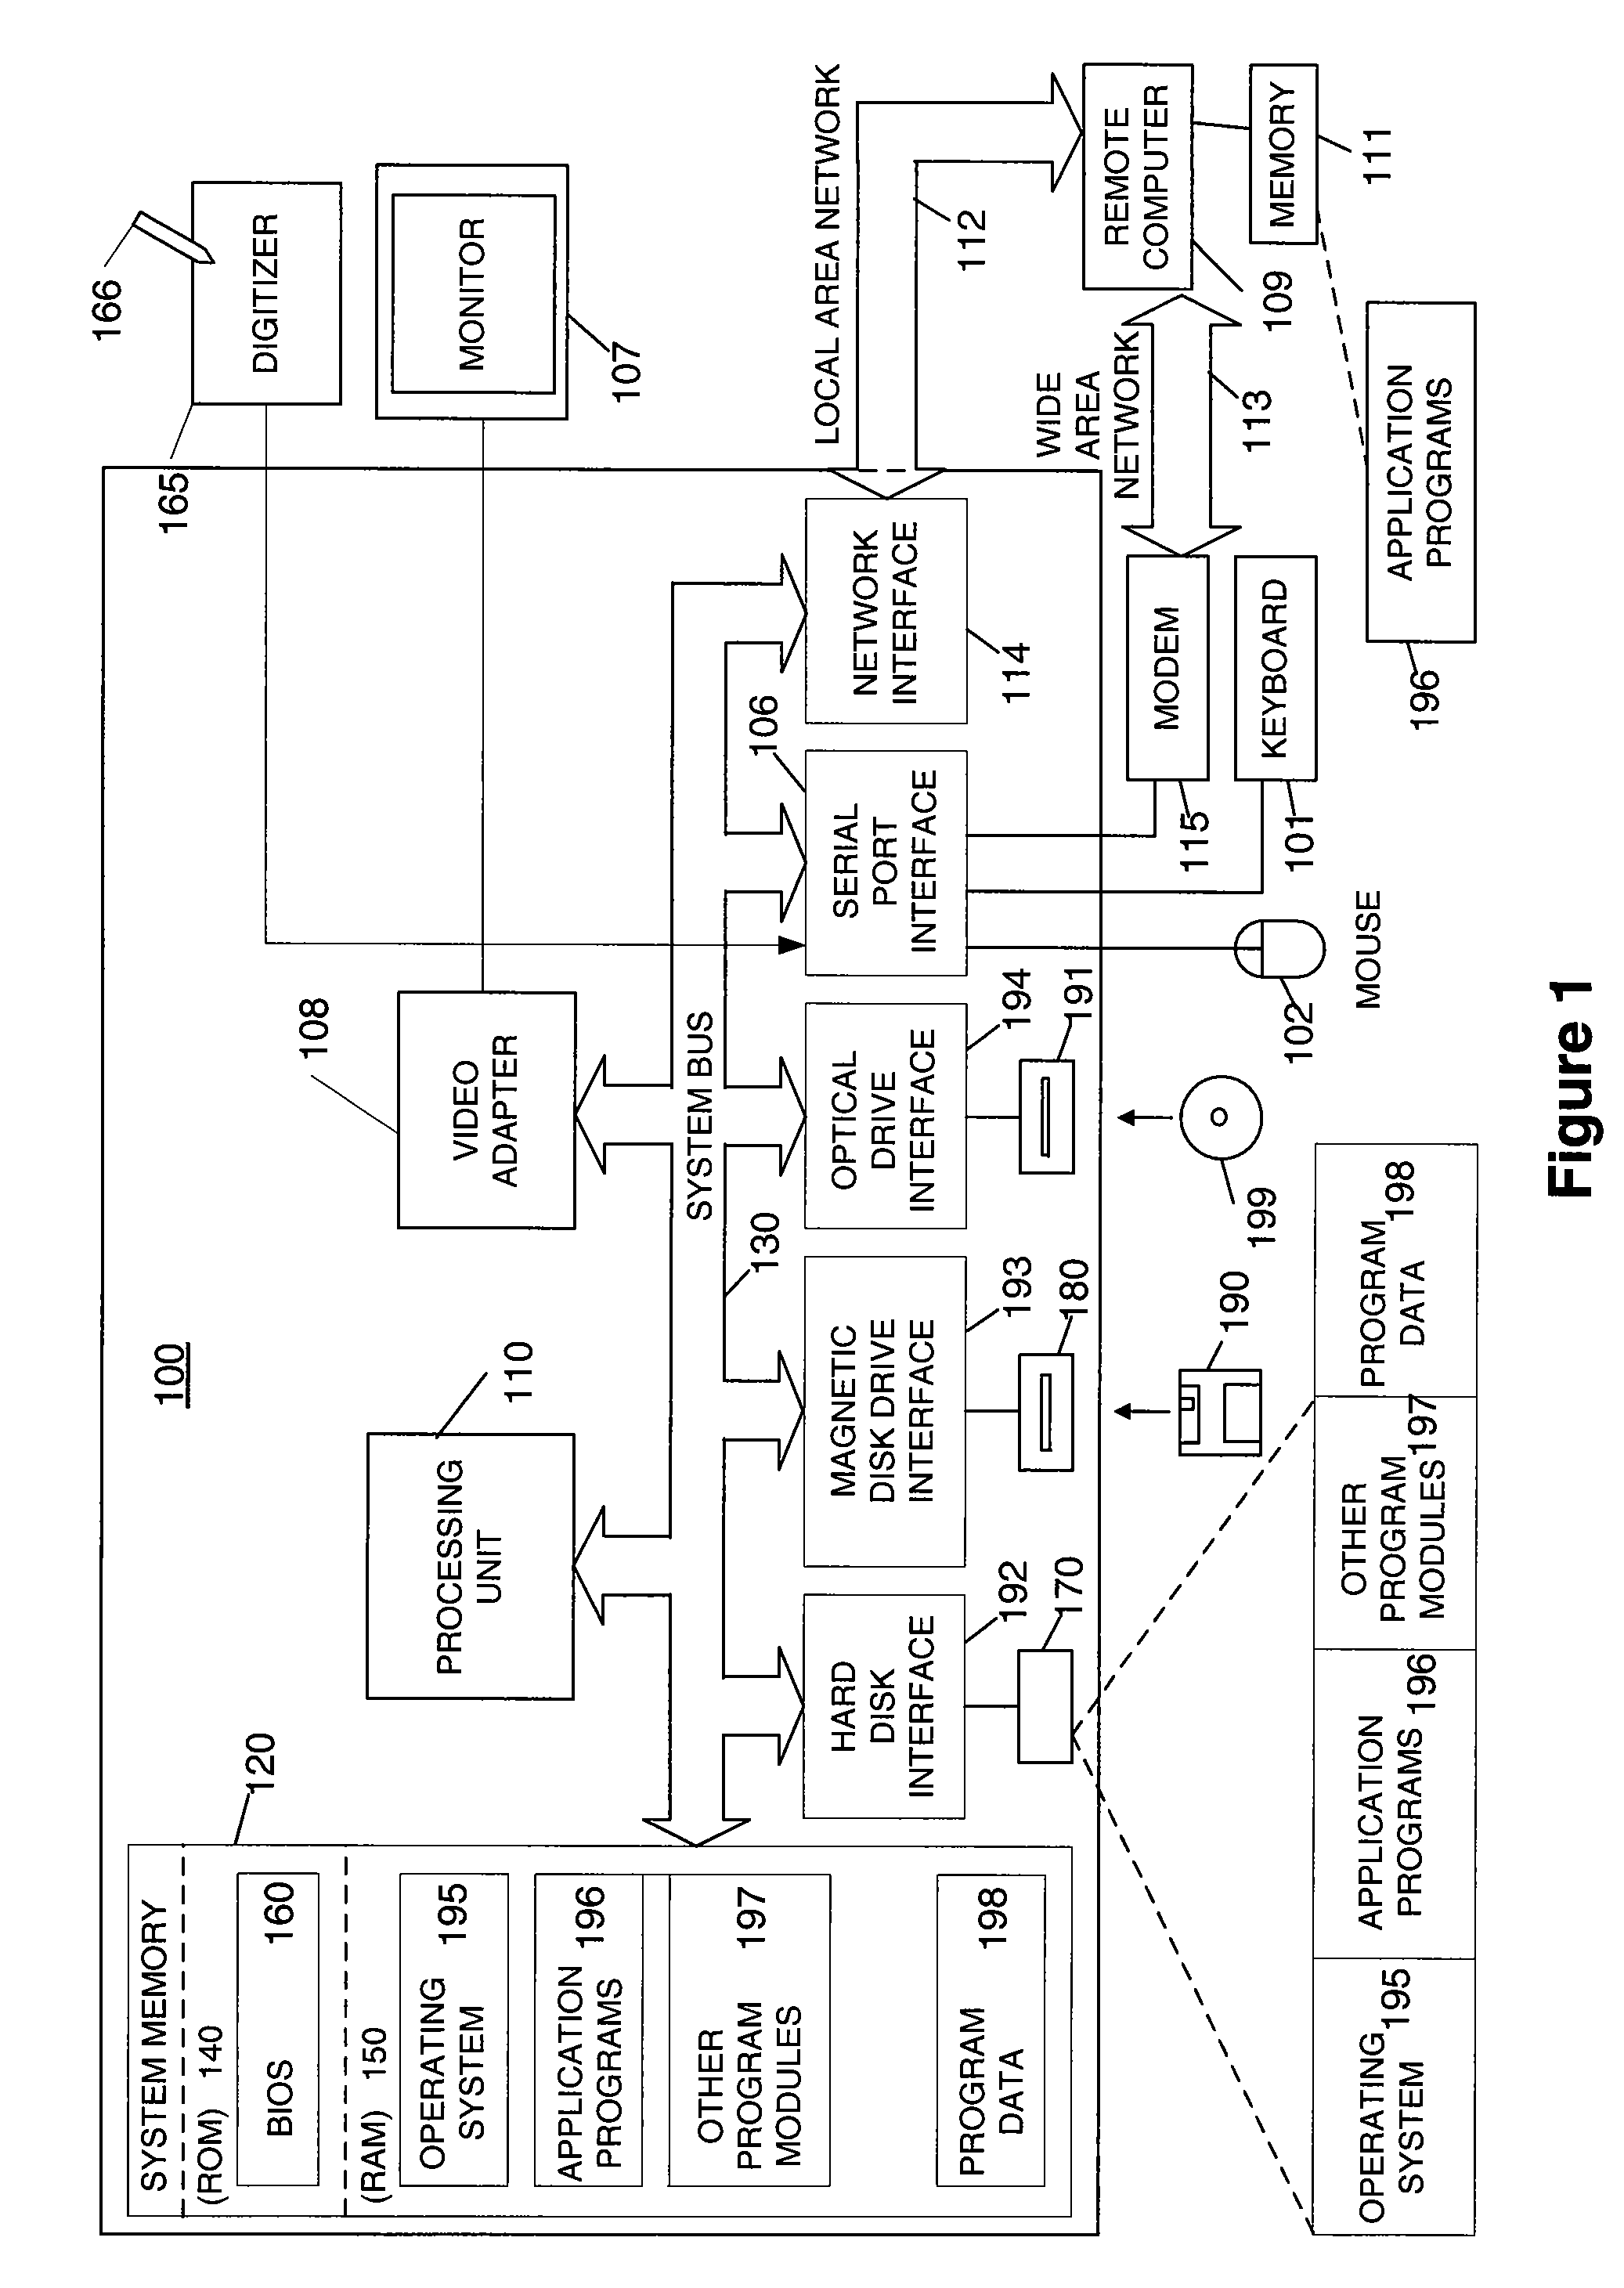 Passive embedded interaction code